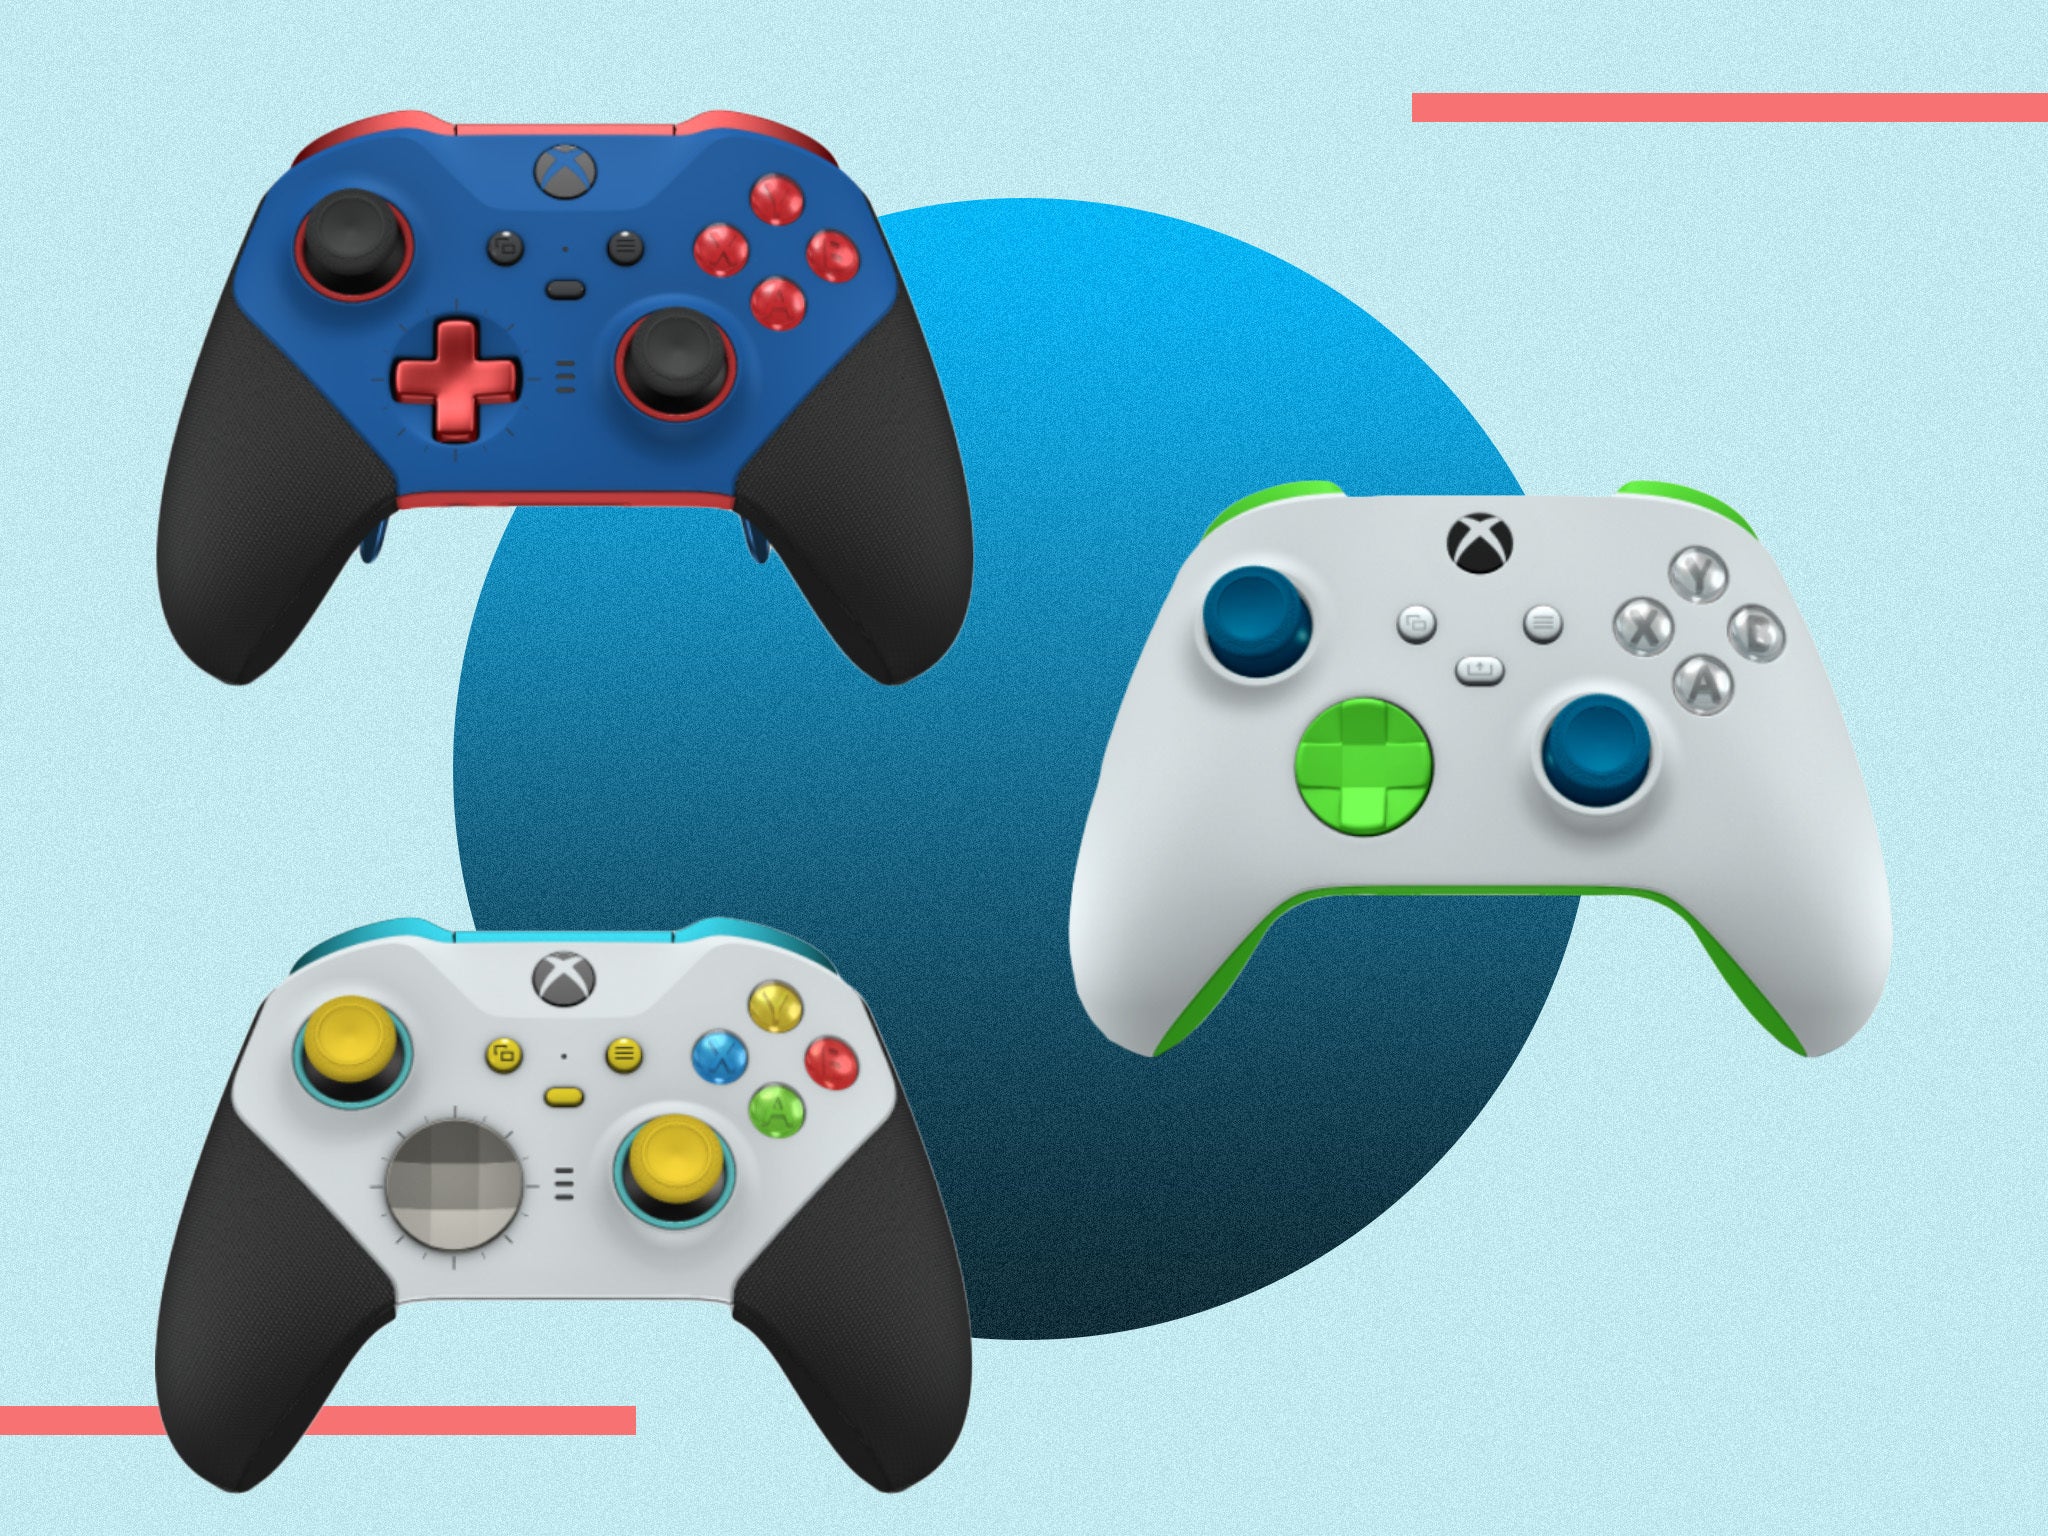 Make your gamepad truly unique with the design lab